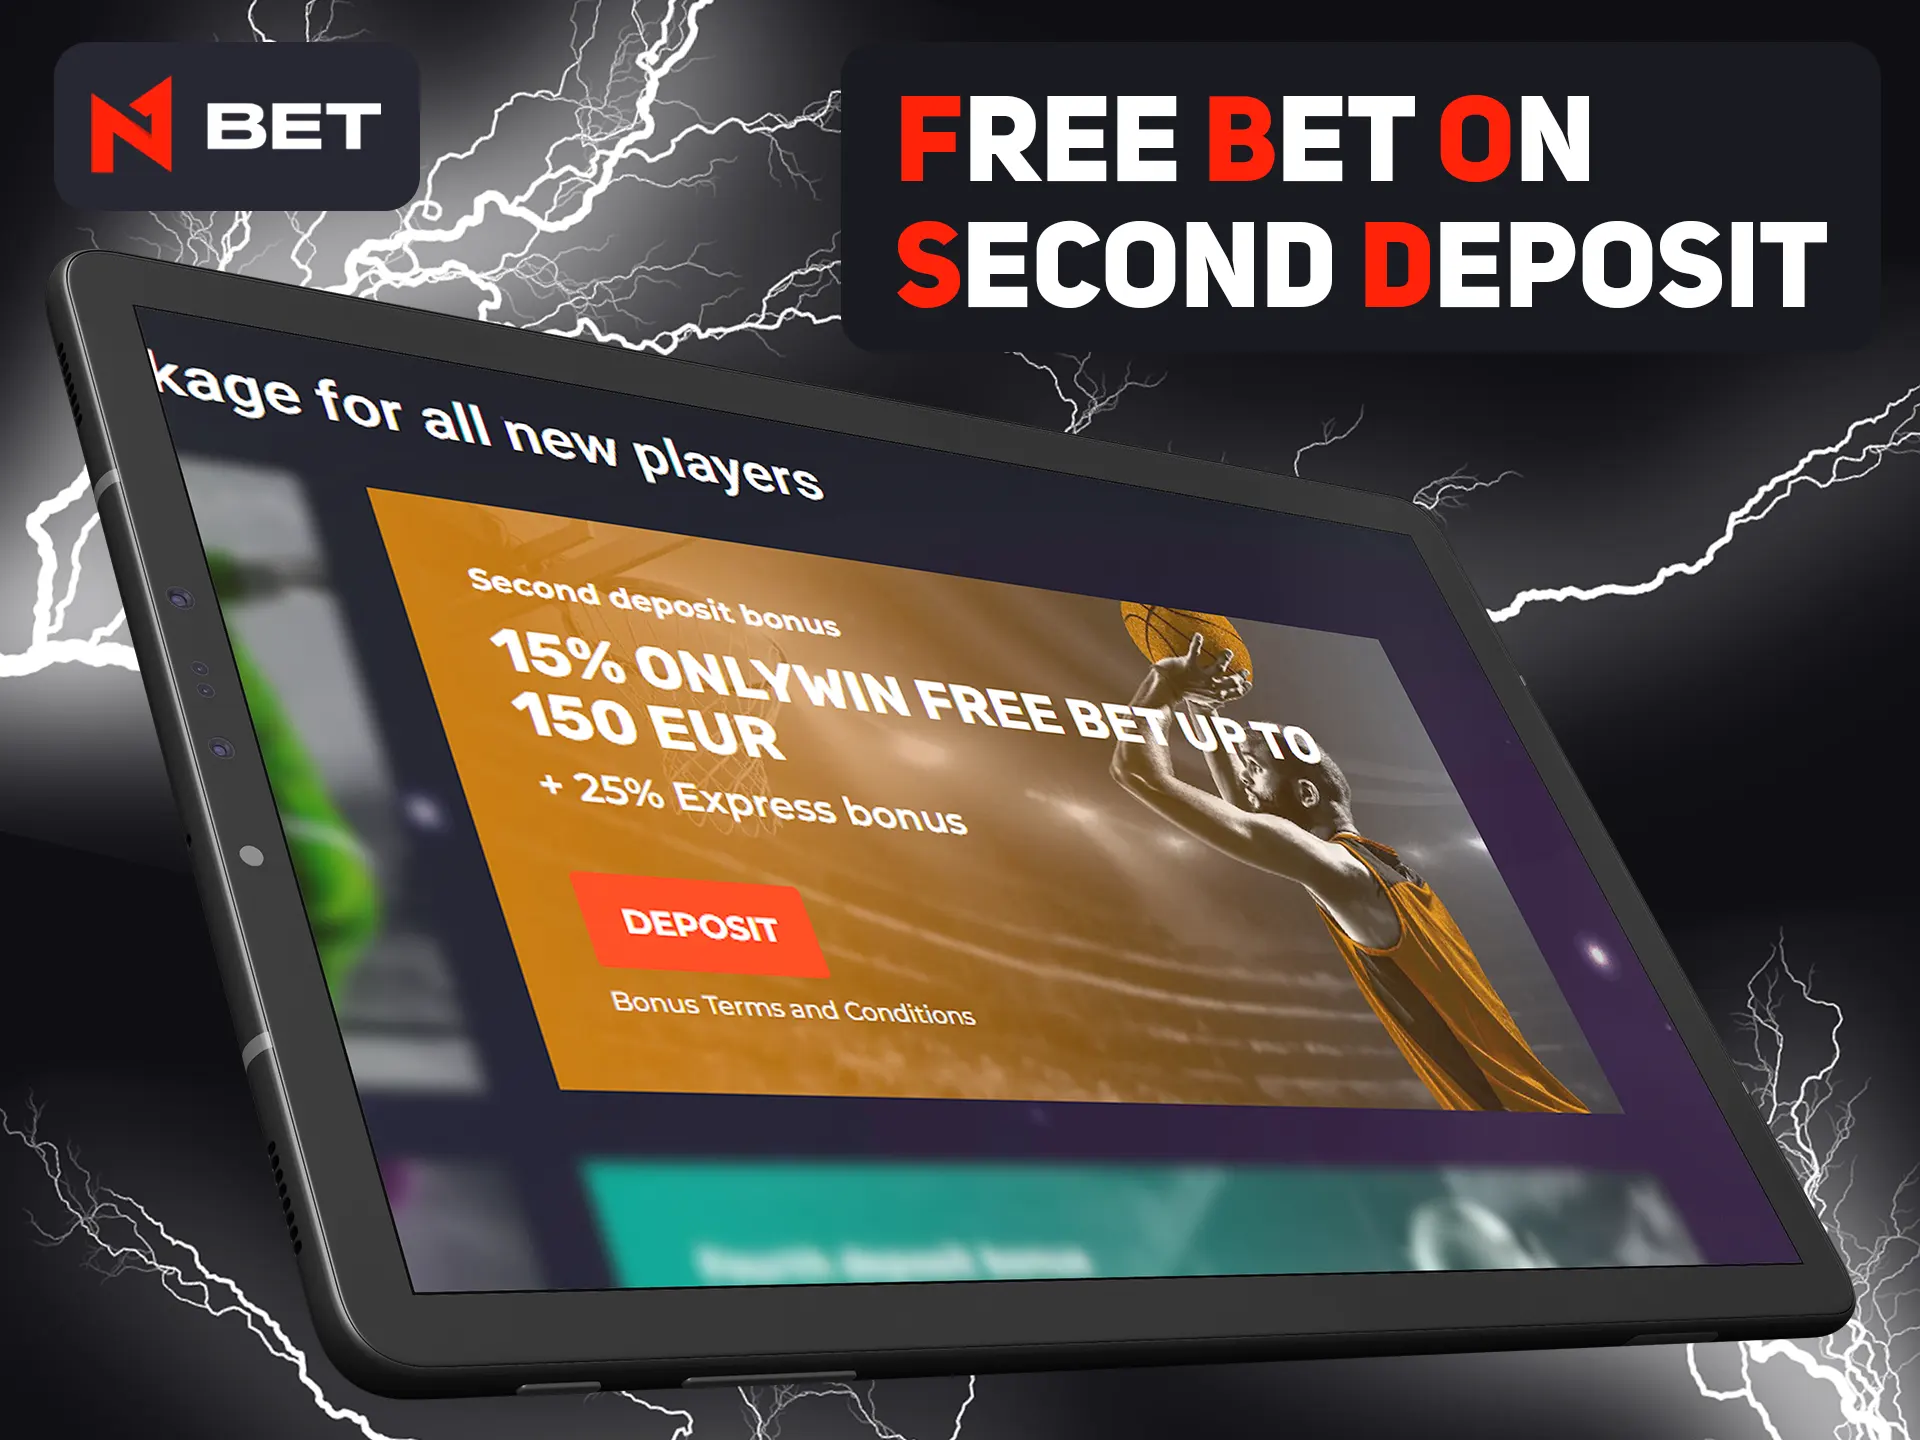 Make bet at N1bet after second deposit and get additional winnings.